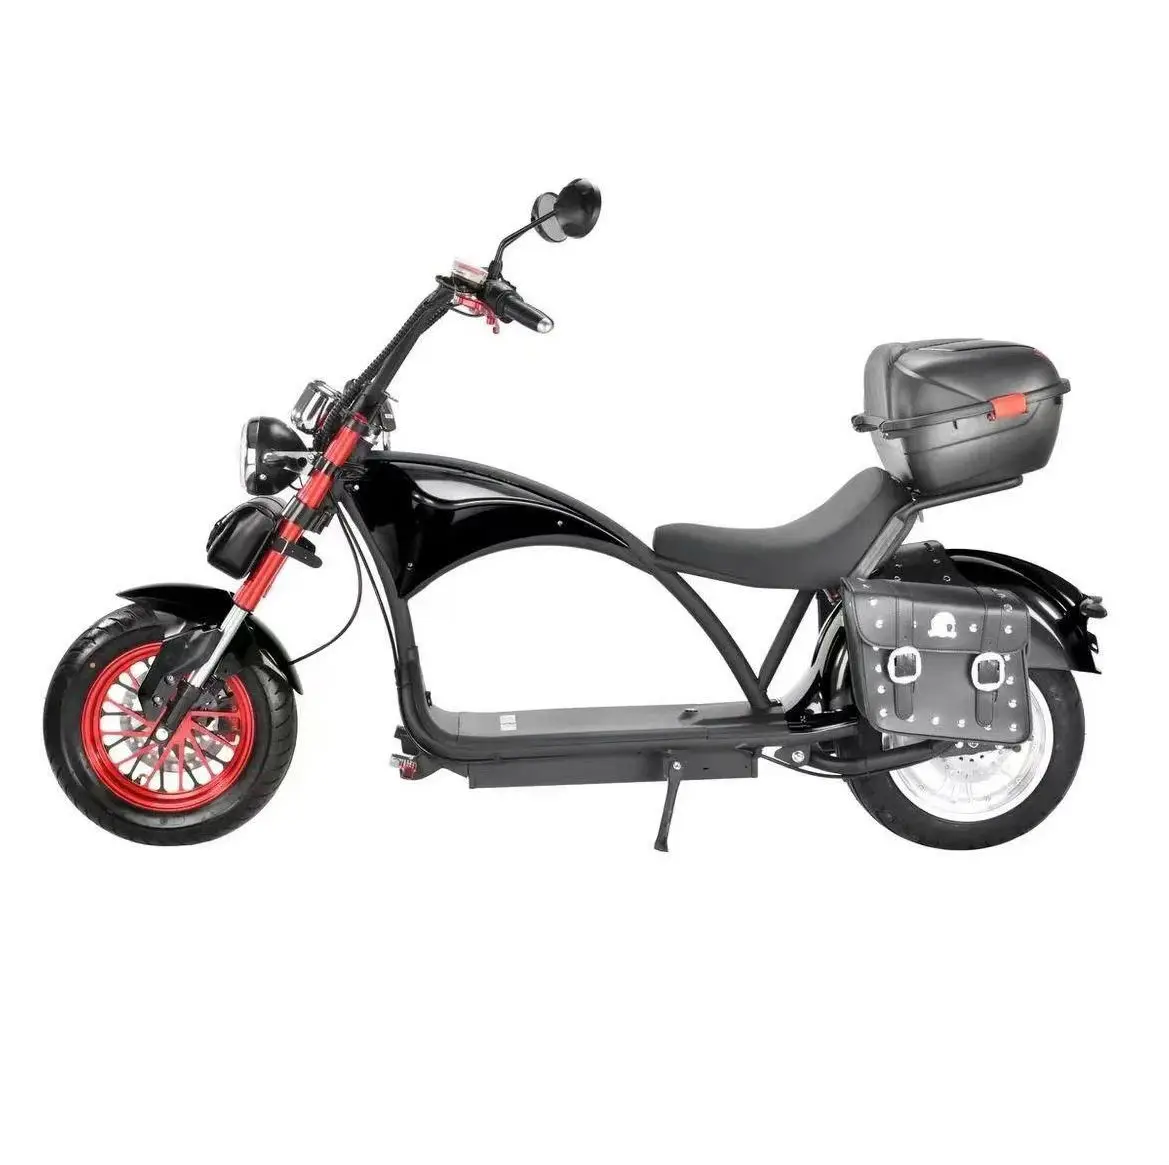 

Emark EEC COC European warehouse sur off road electric fat scooter emmo electric motorcycle e bikes